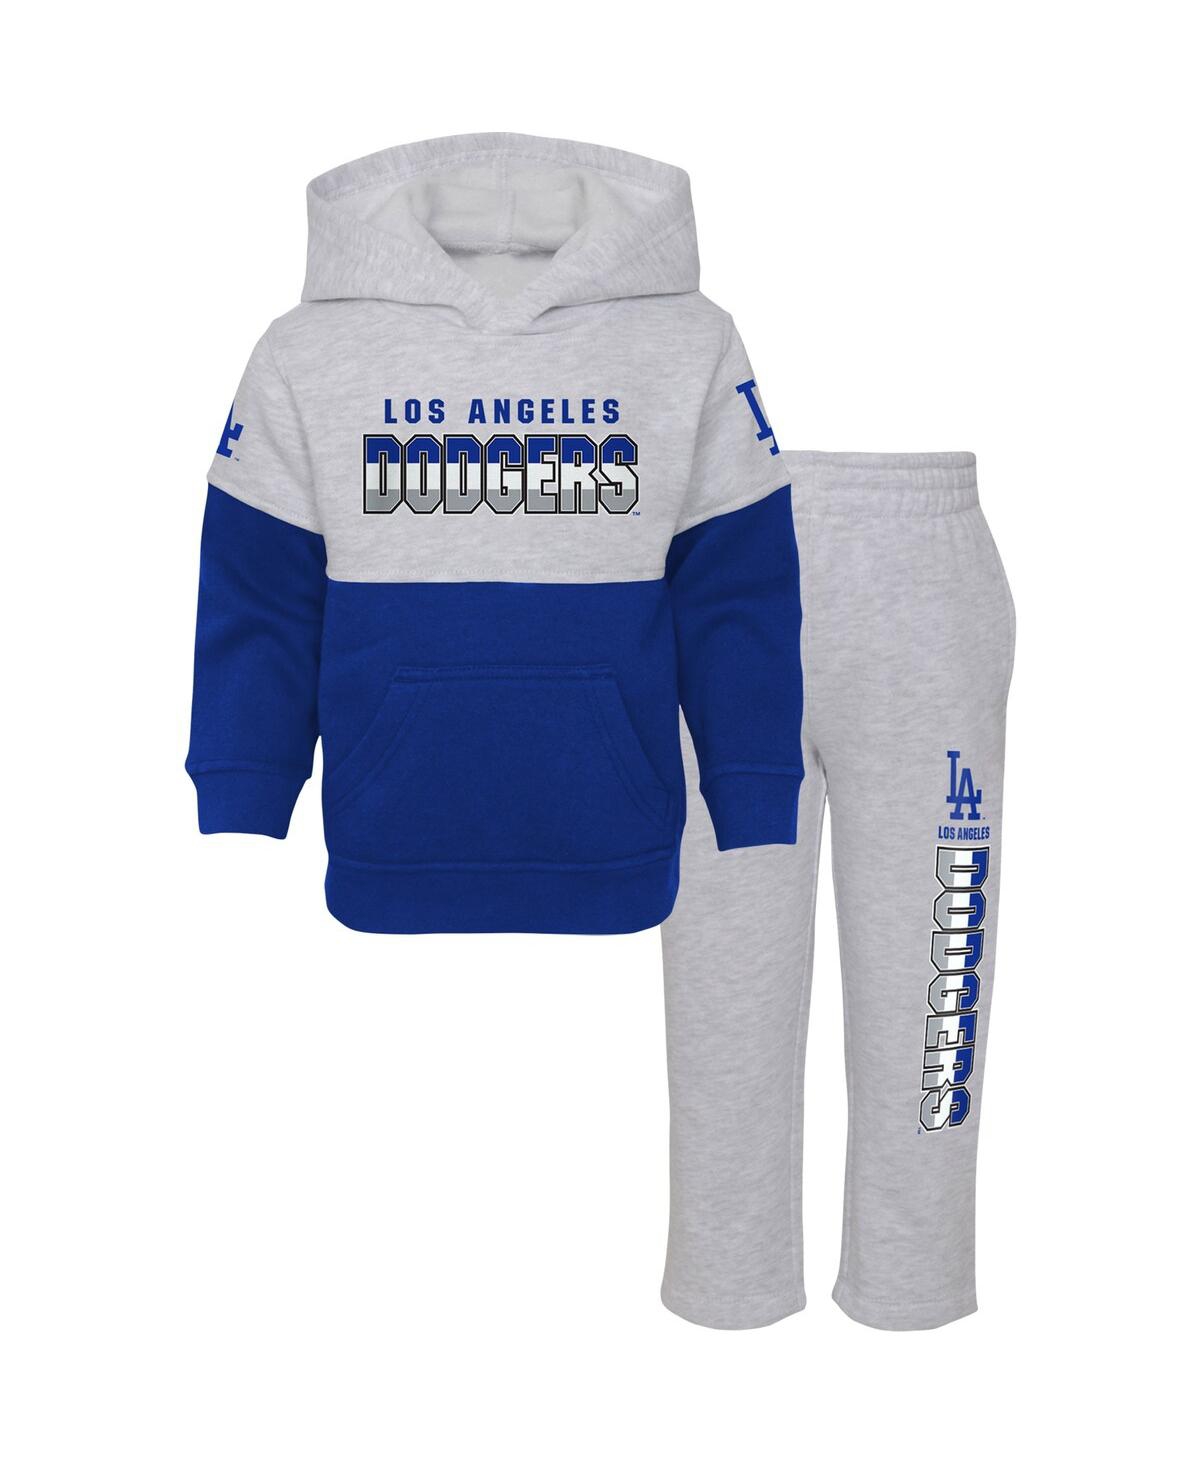 Shop Outerstuff Infant Boys And Girls Royal, Heather Gray Los Angeles Dodgers Playmaker Pullover Hoodie And Pants Se In Royal,heather Gray